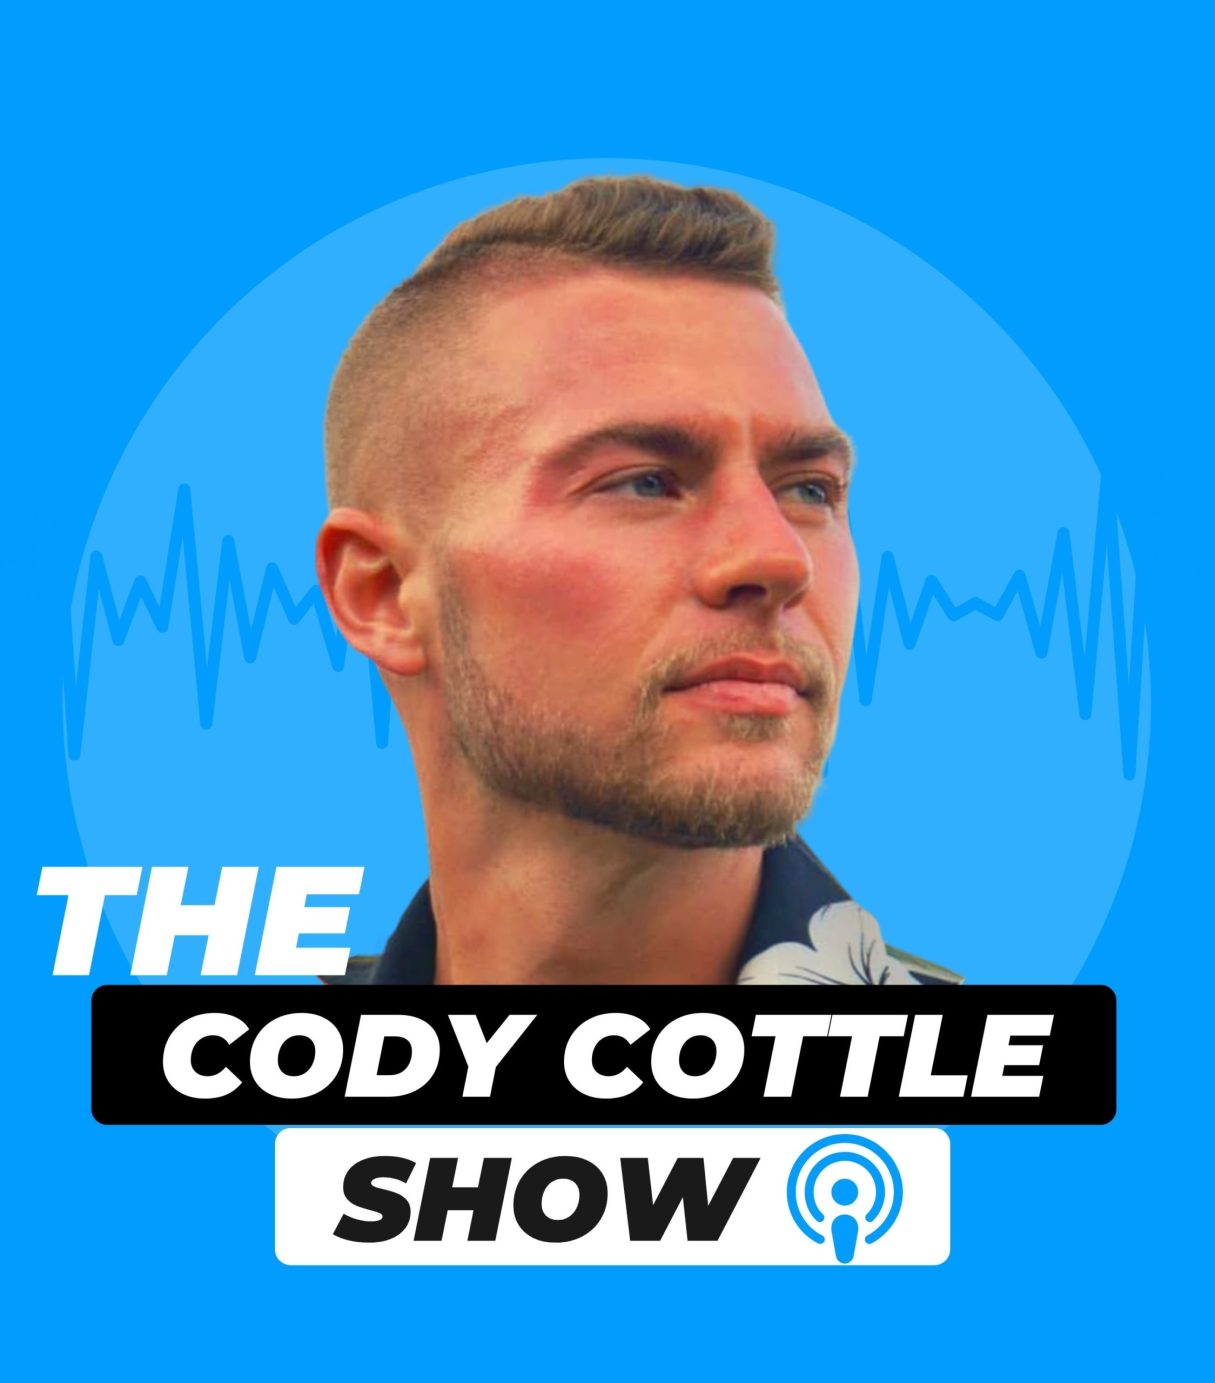 Cody Cottle Show Cover